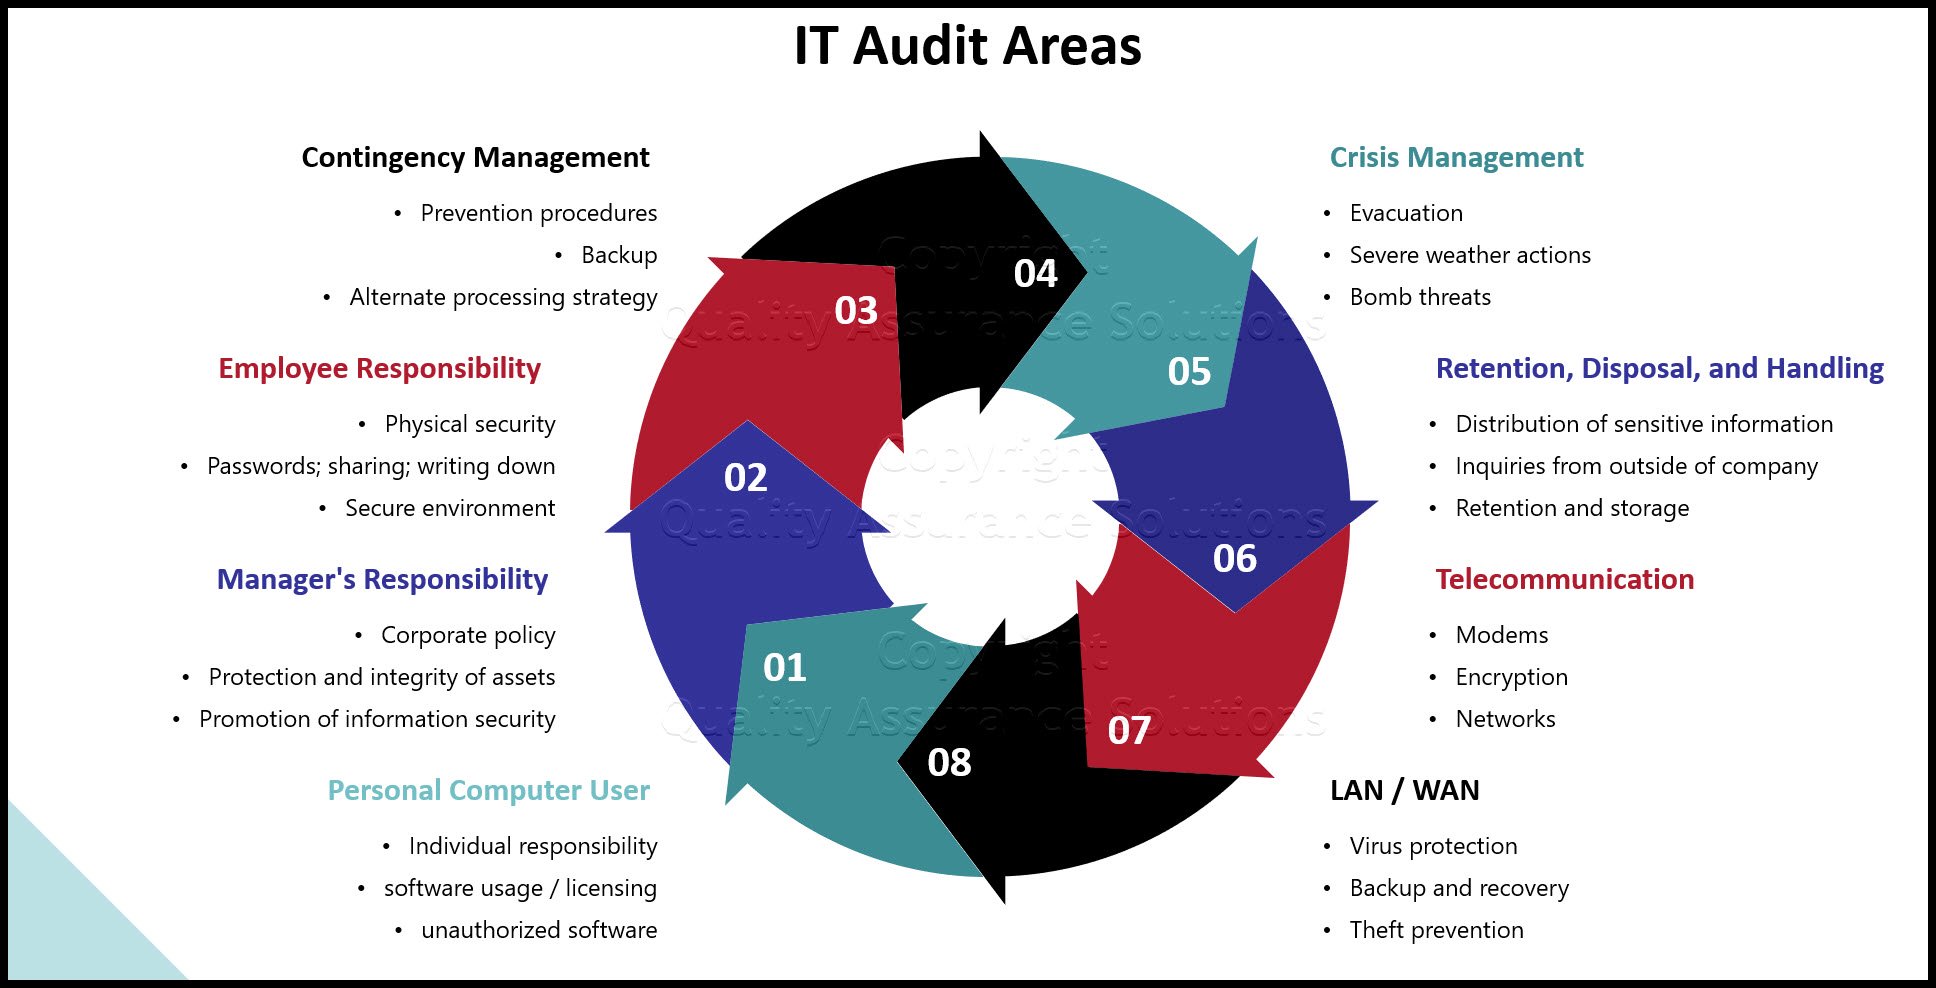 This article provides the key elements to include in an IT audit program. It considers current situation assesment, high level needs, organizational needs, PC user issues, manager responsibility, contigency, crisis, risk and a host of other issues.